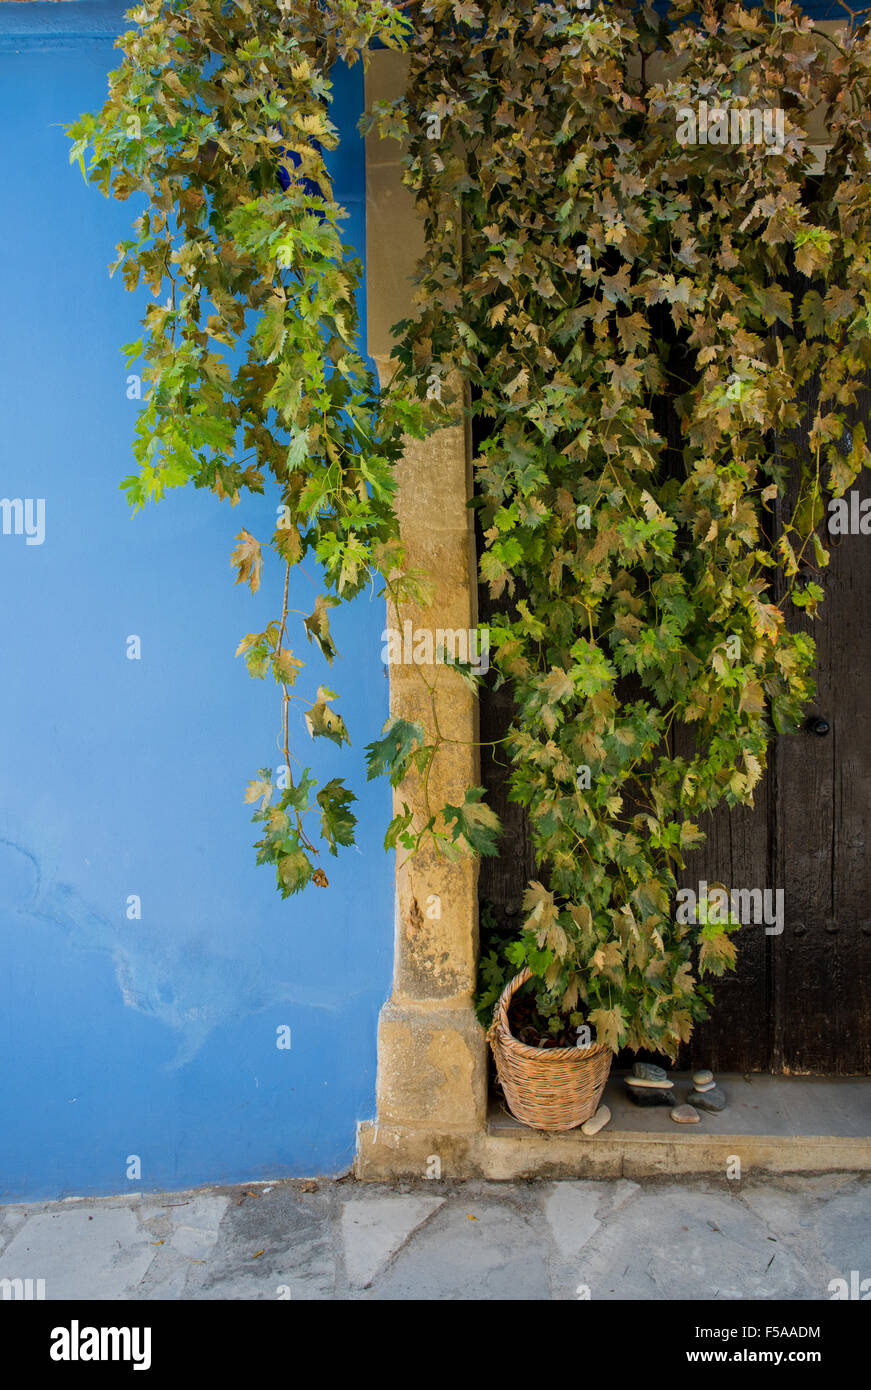 Green foliage covering a wooden door and a blue wall from a village in Cyprus Stock Photo